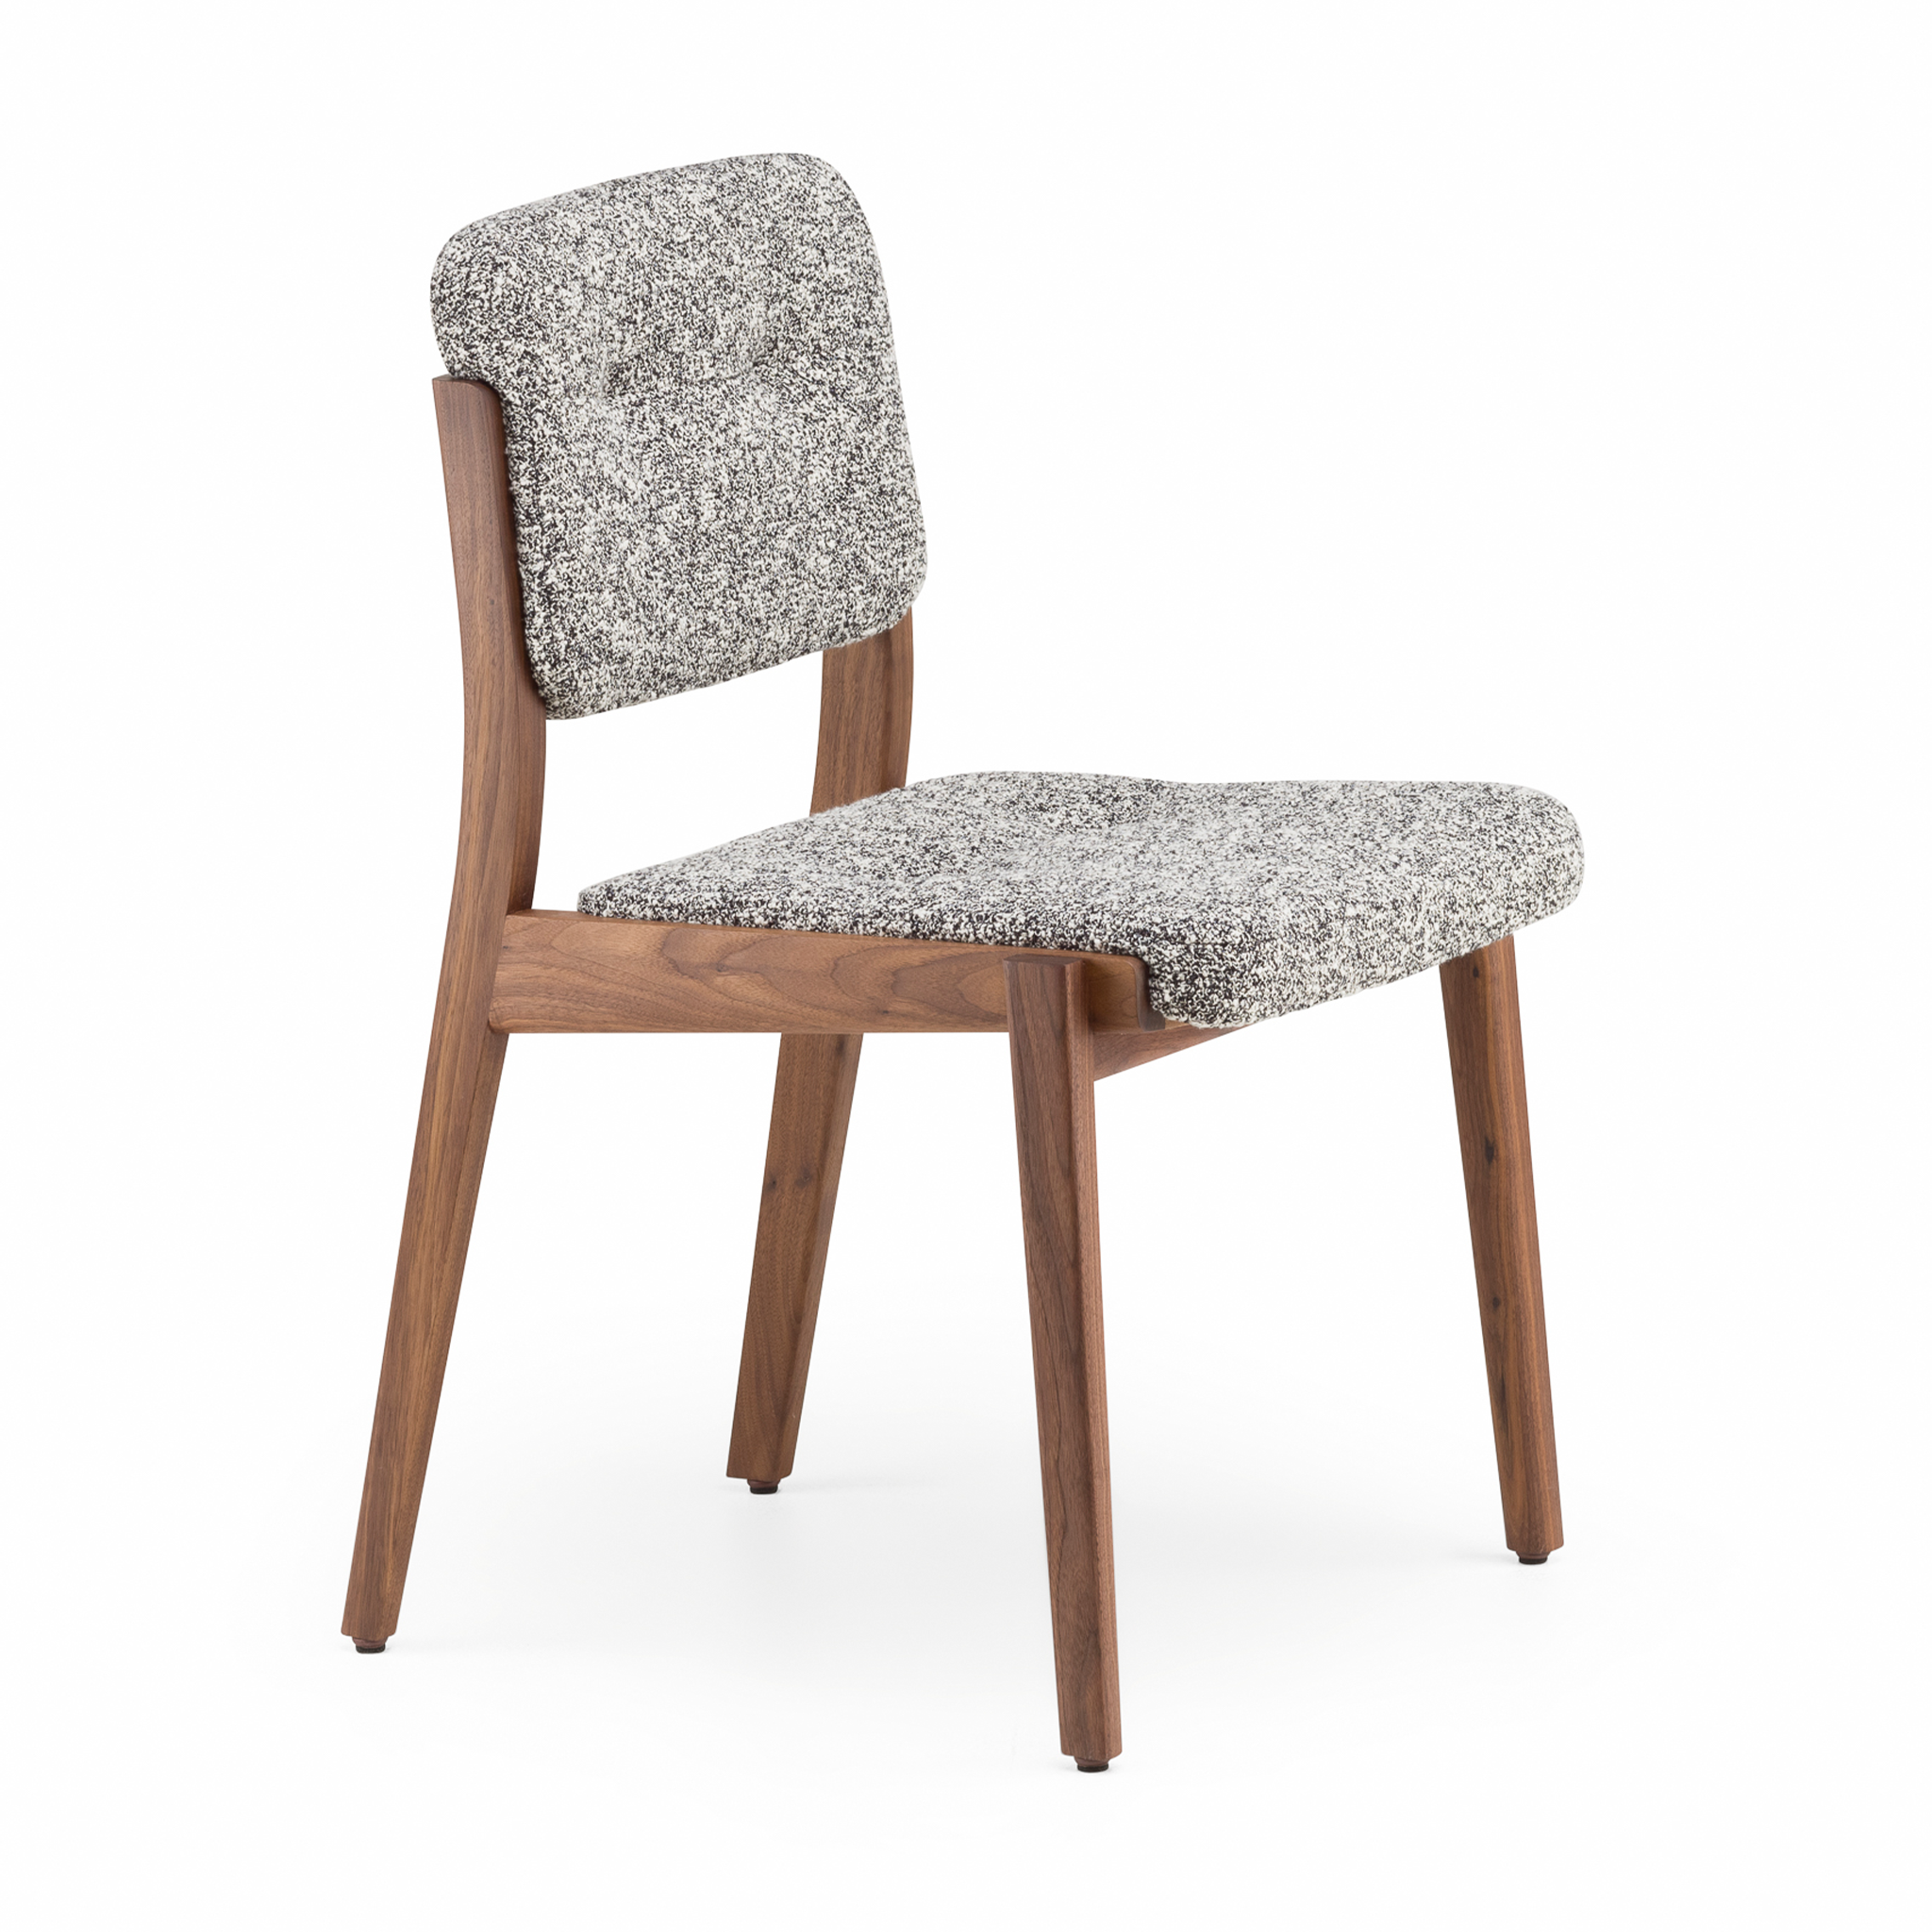 Capo Dining Chair by Neri&Hu